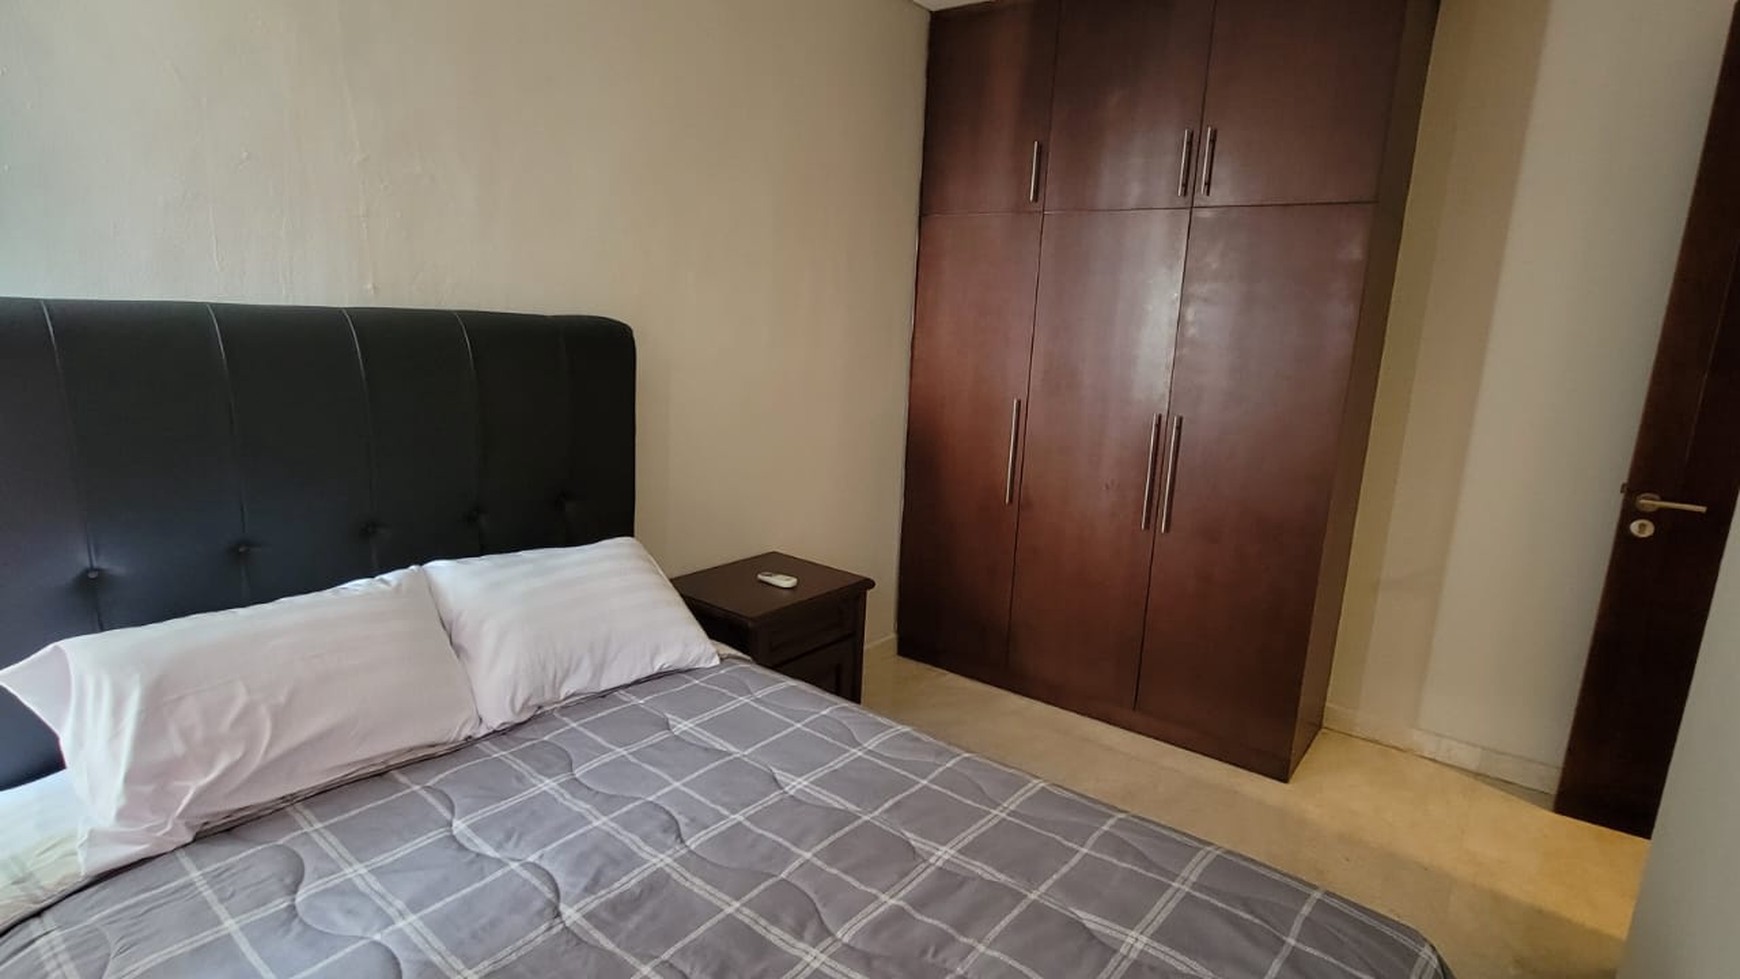 For Rent Apartemen The Empyreal